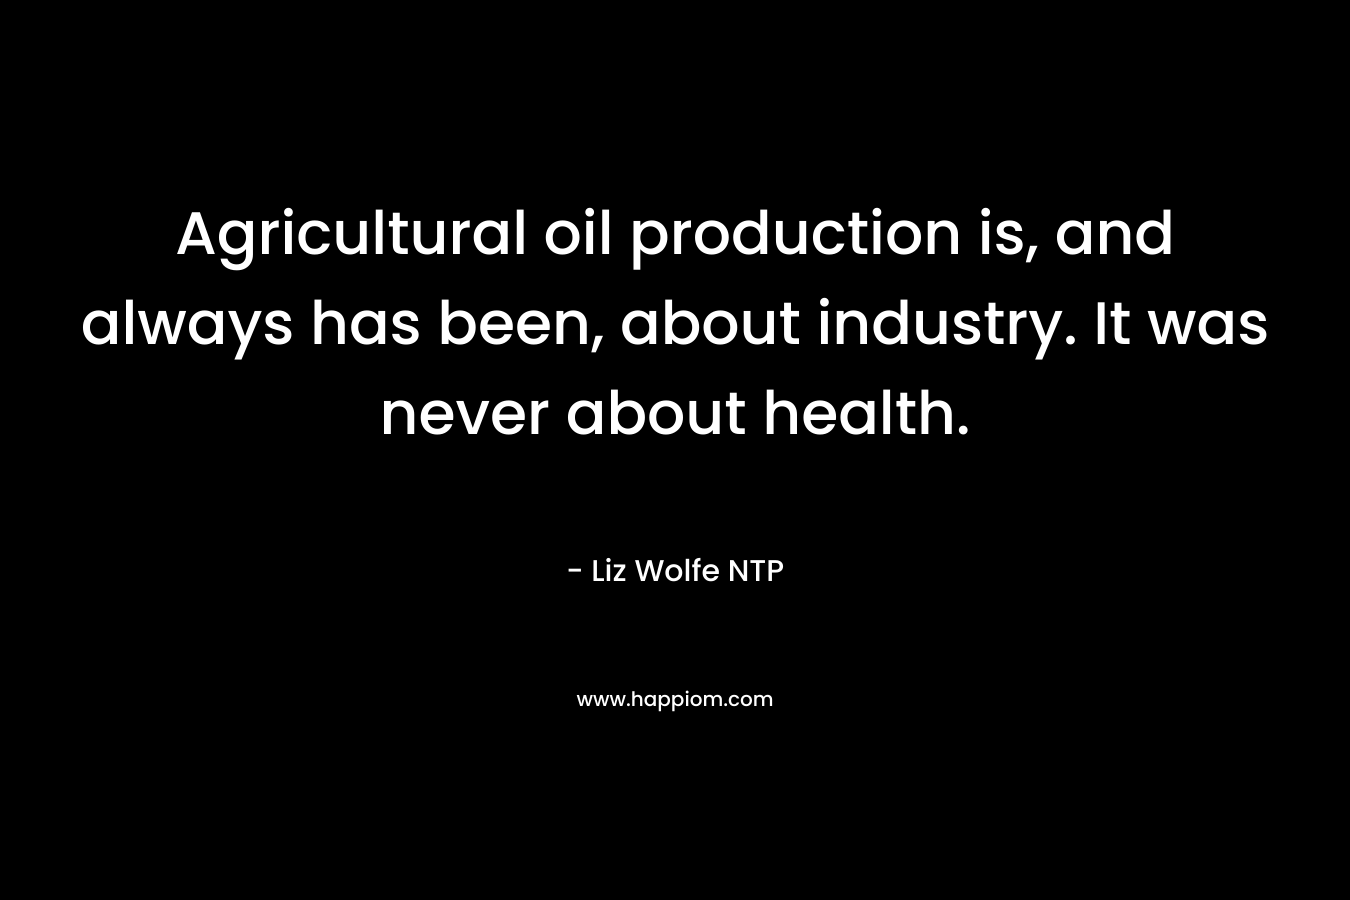 Agricultural oil production is, and always has been, about industry. It was never about health. – Liz Wolfe NTP